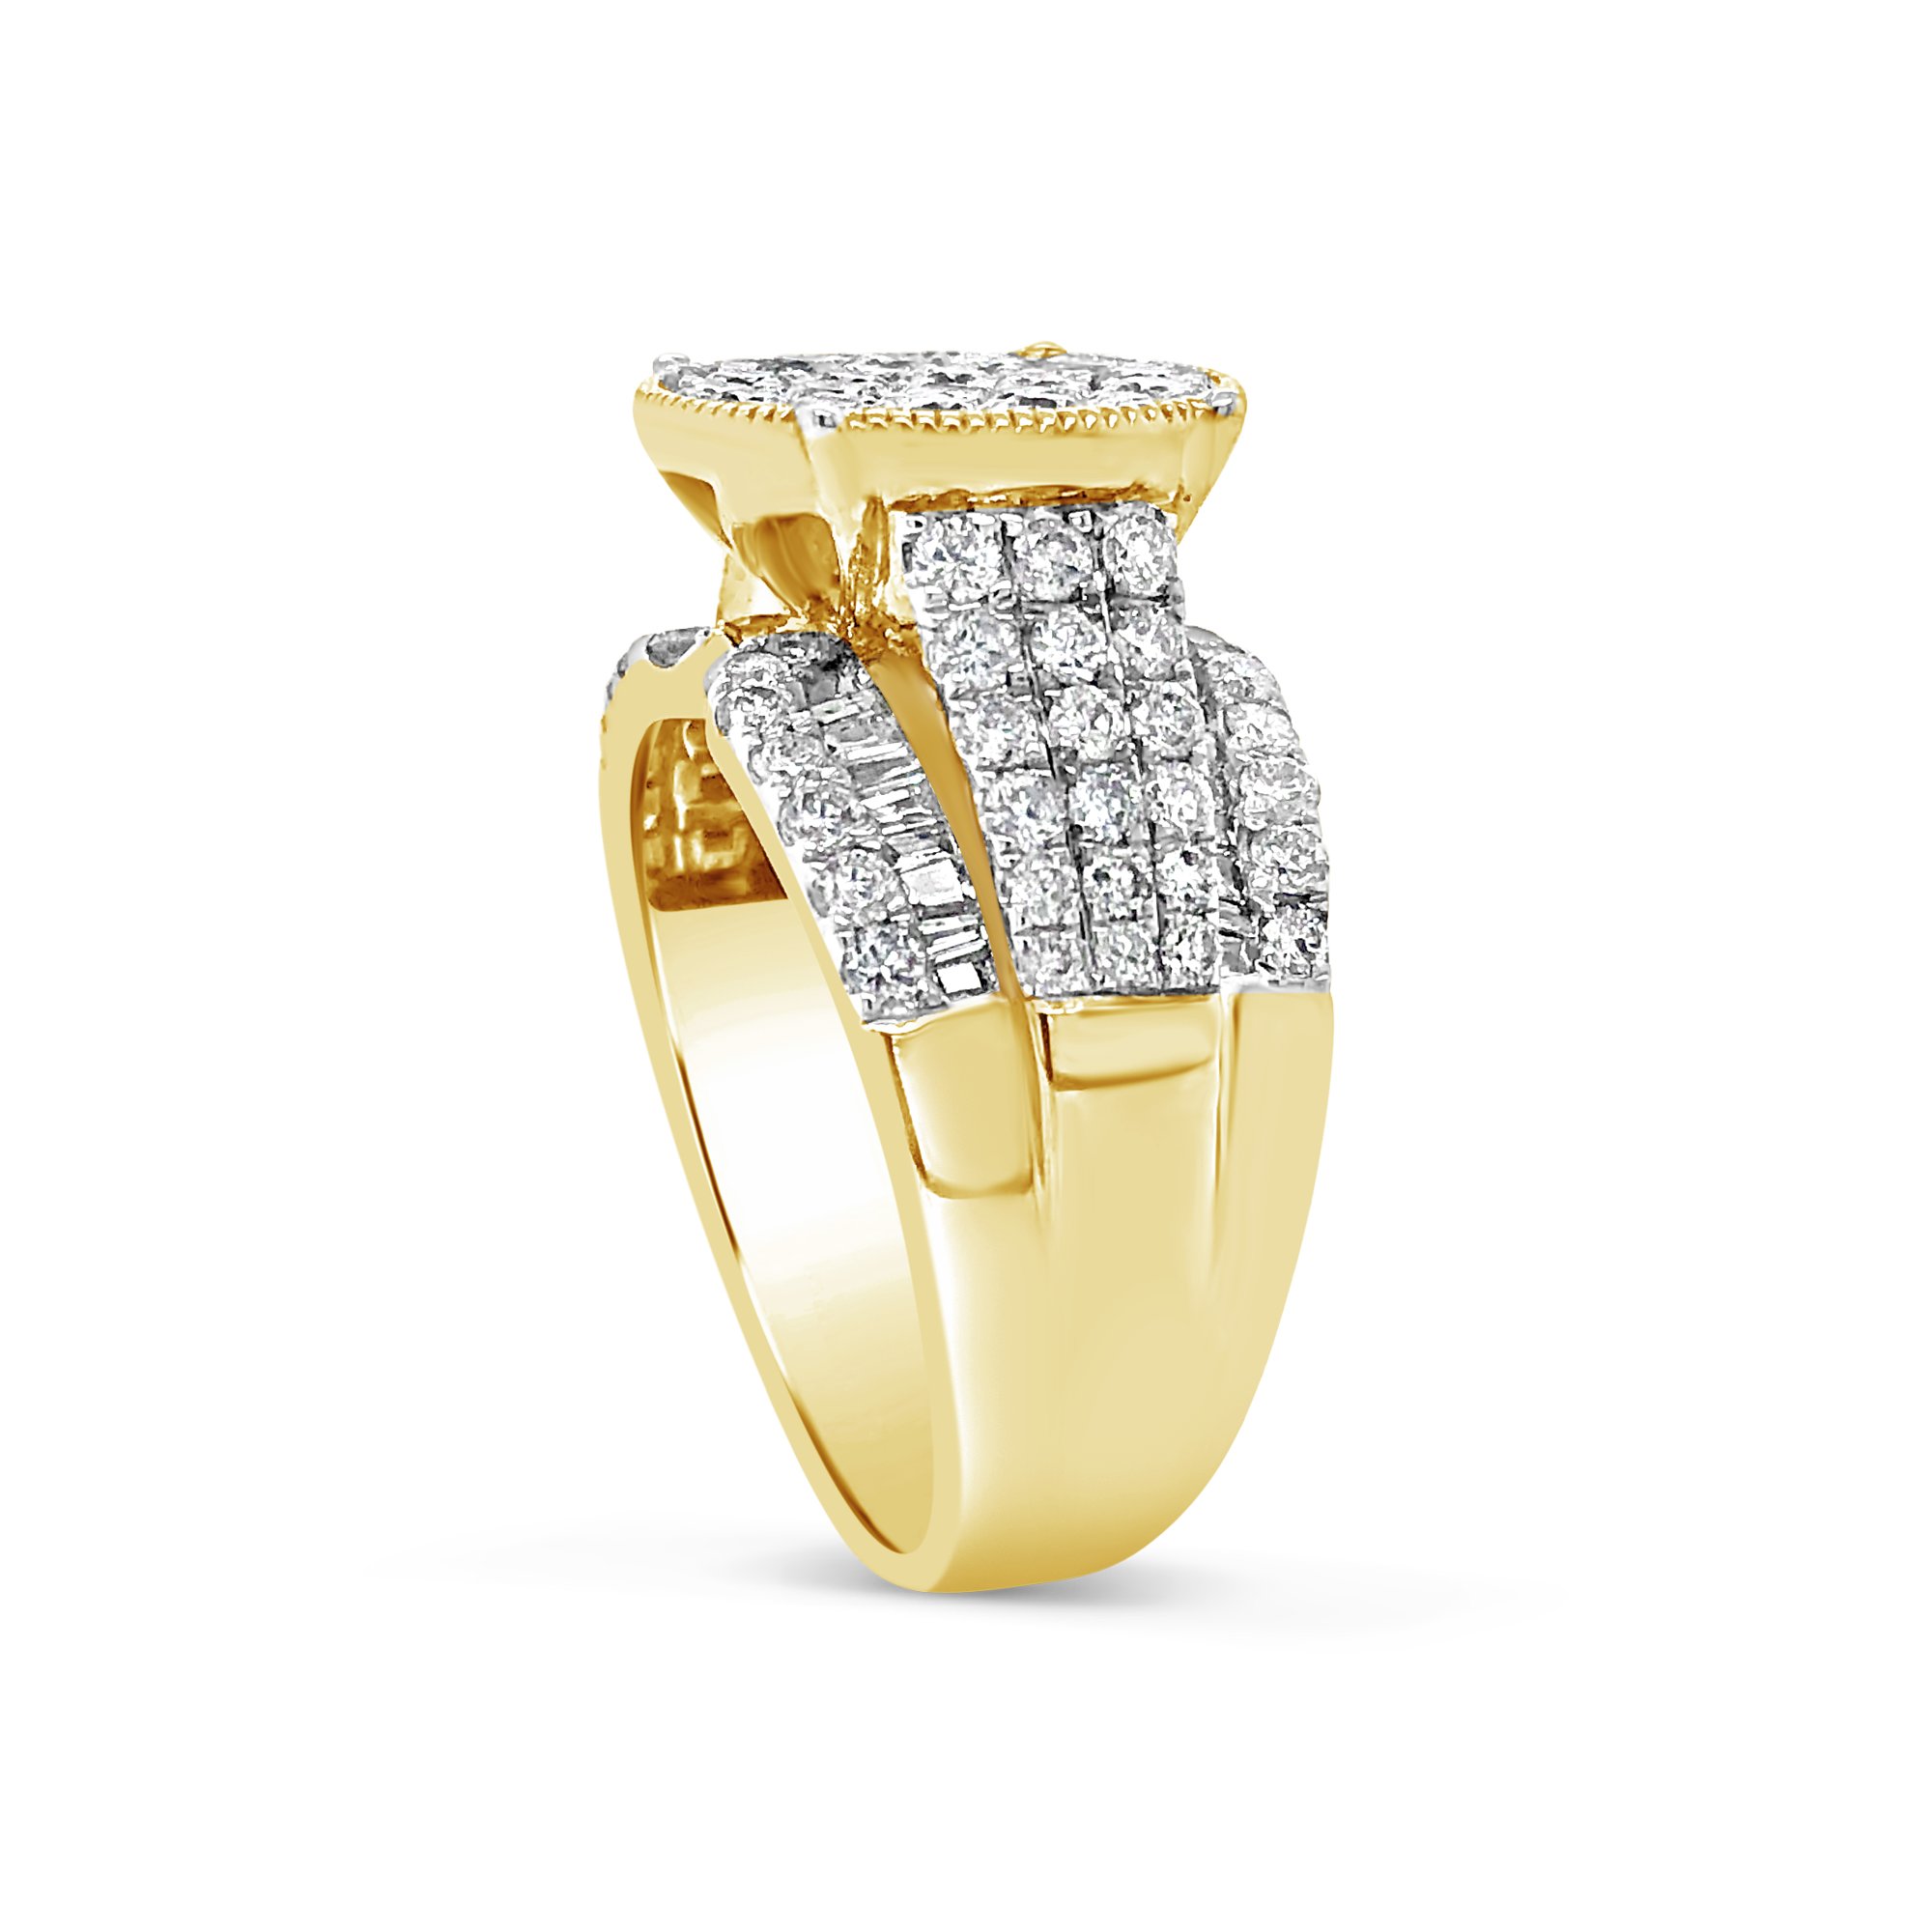 Diamond Halo Ring 2 CTW Round Cut w/ Baguettes 10K Yellow Gold